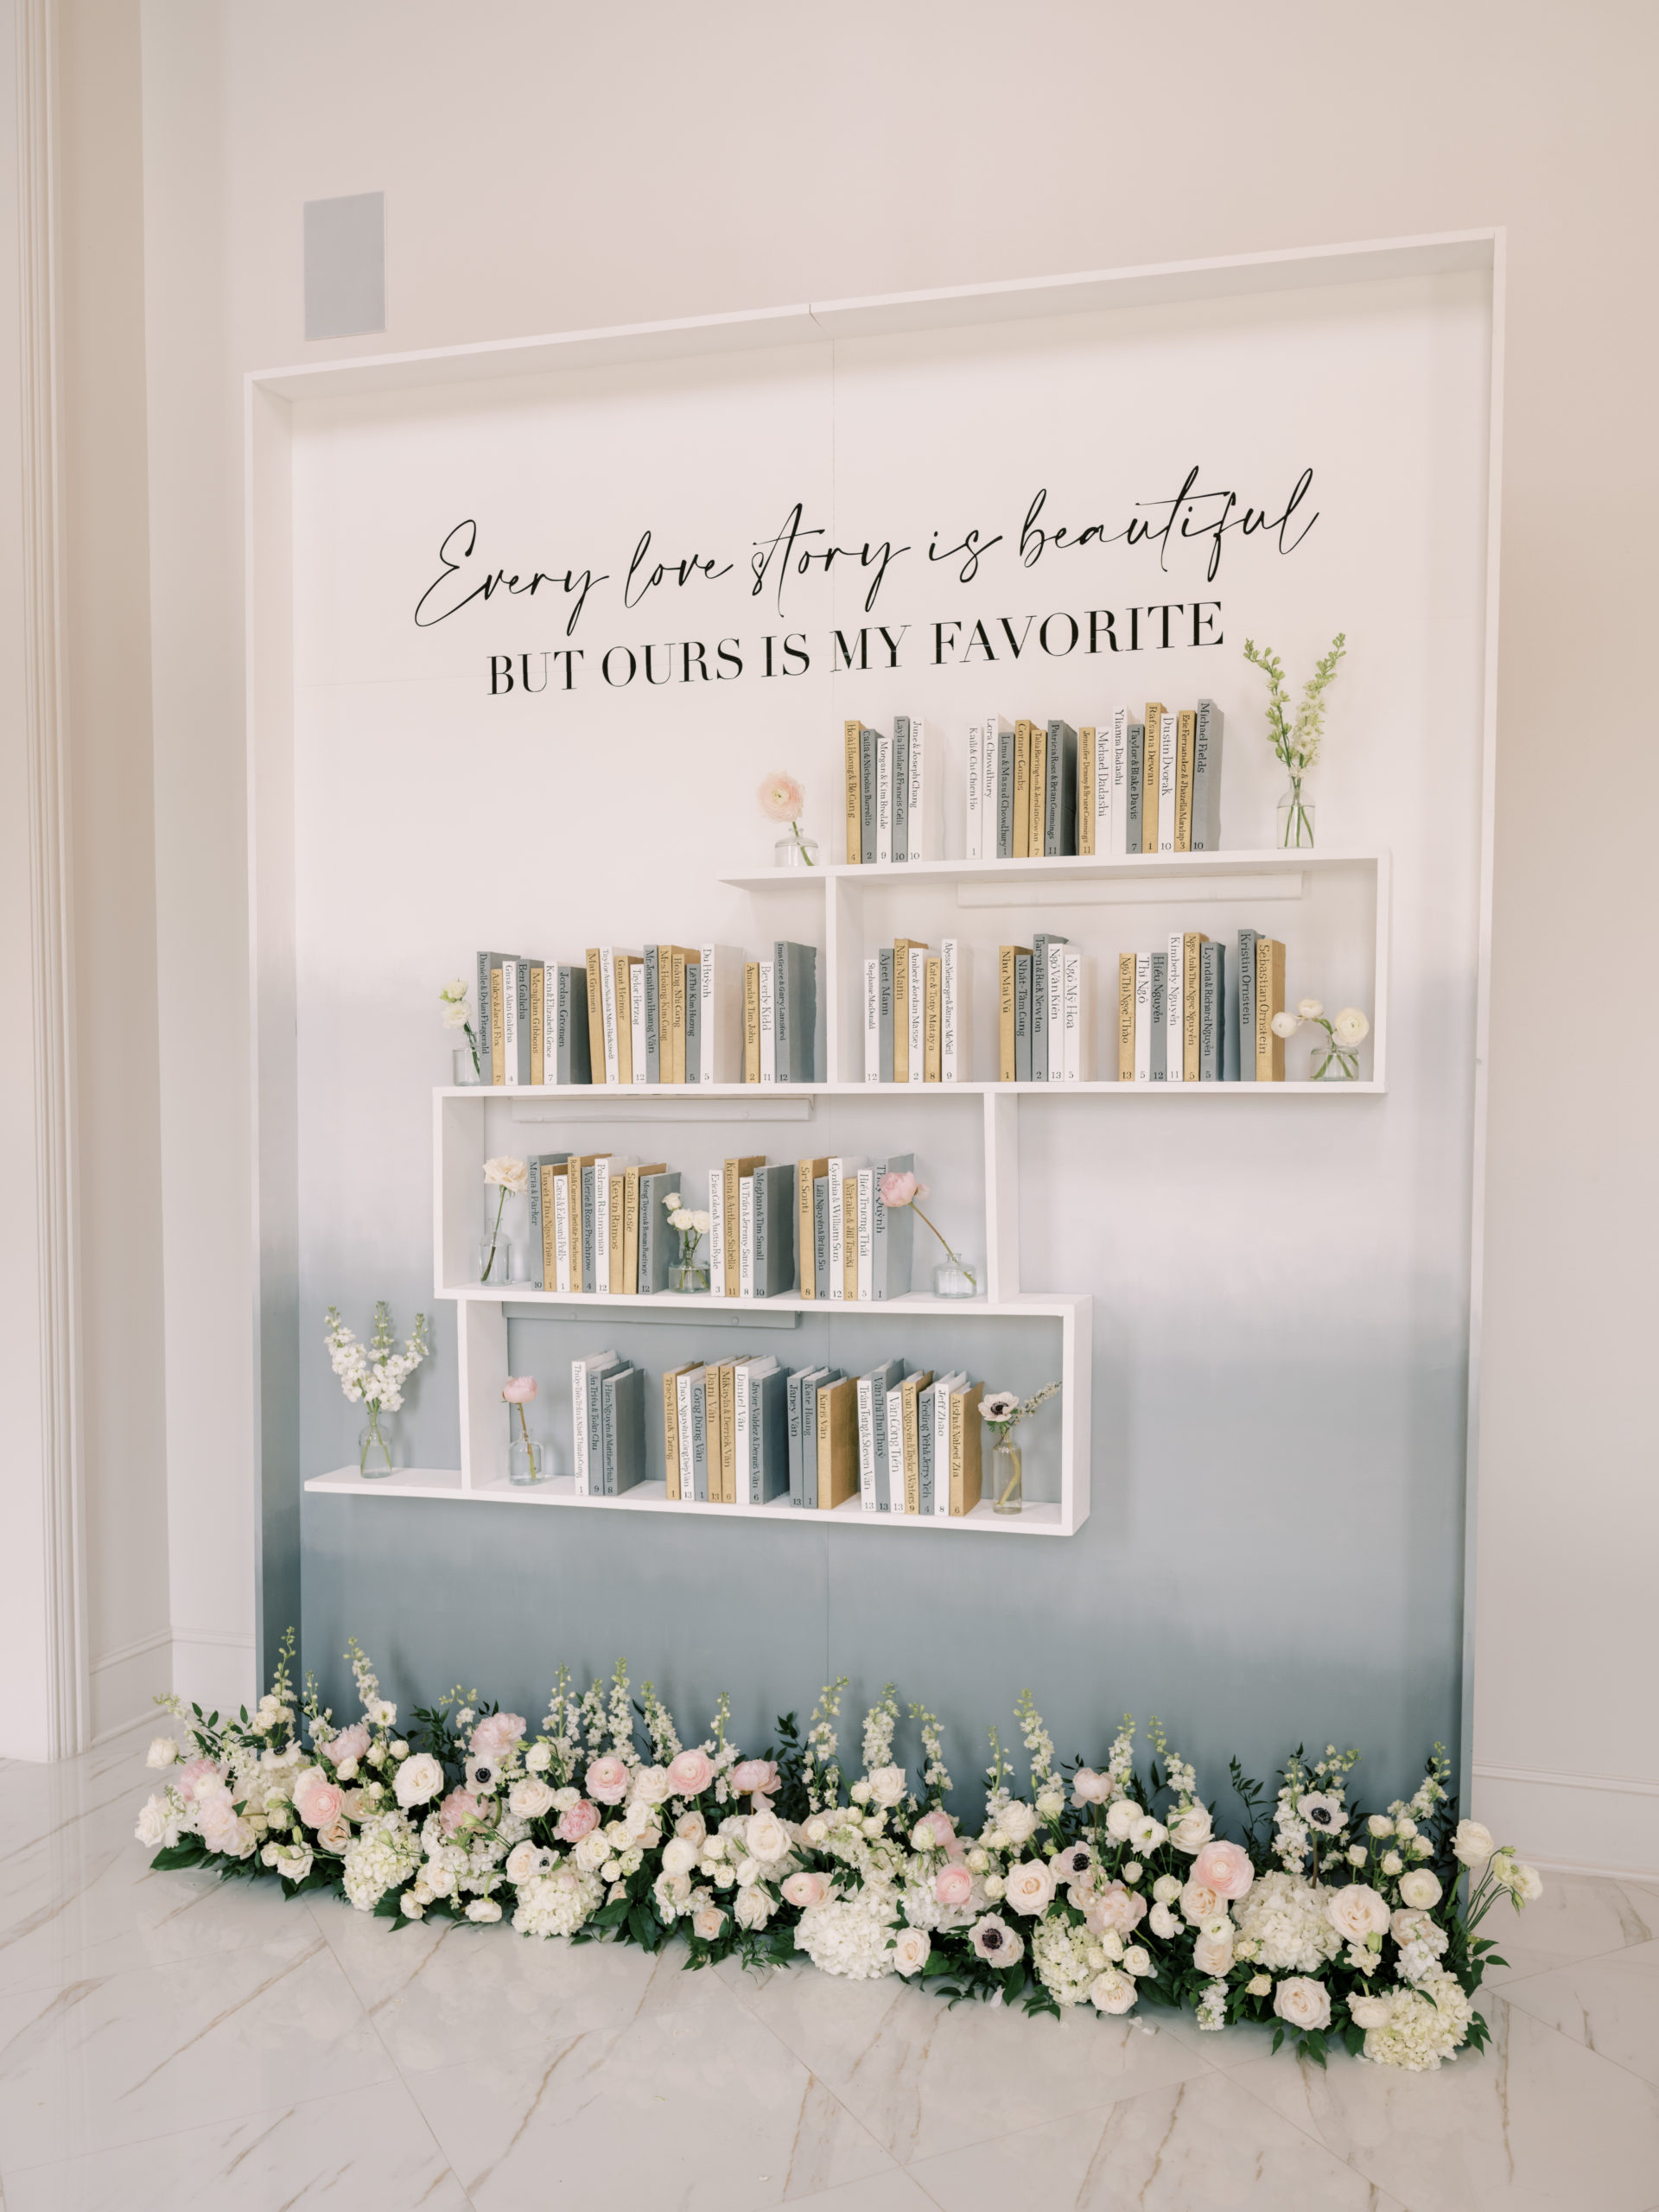 DIY Please Find Your Seat Wedding Sign For Your Guests